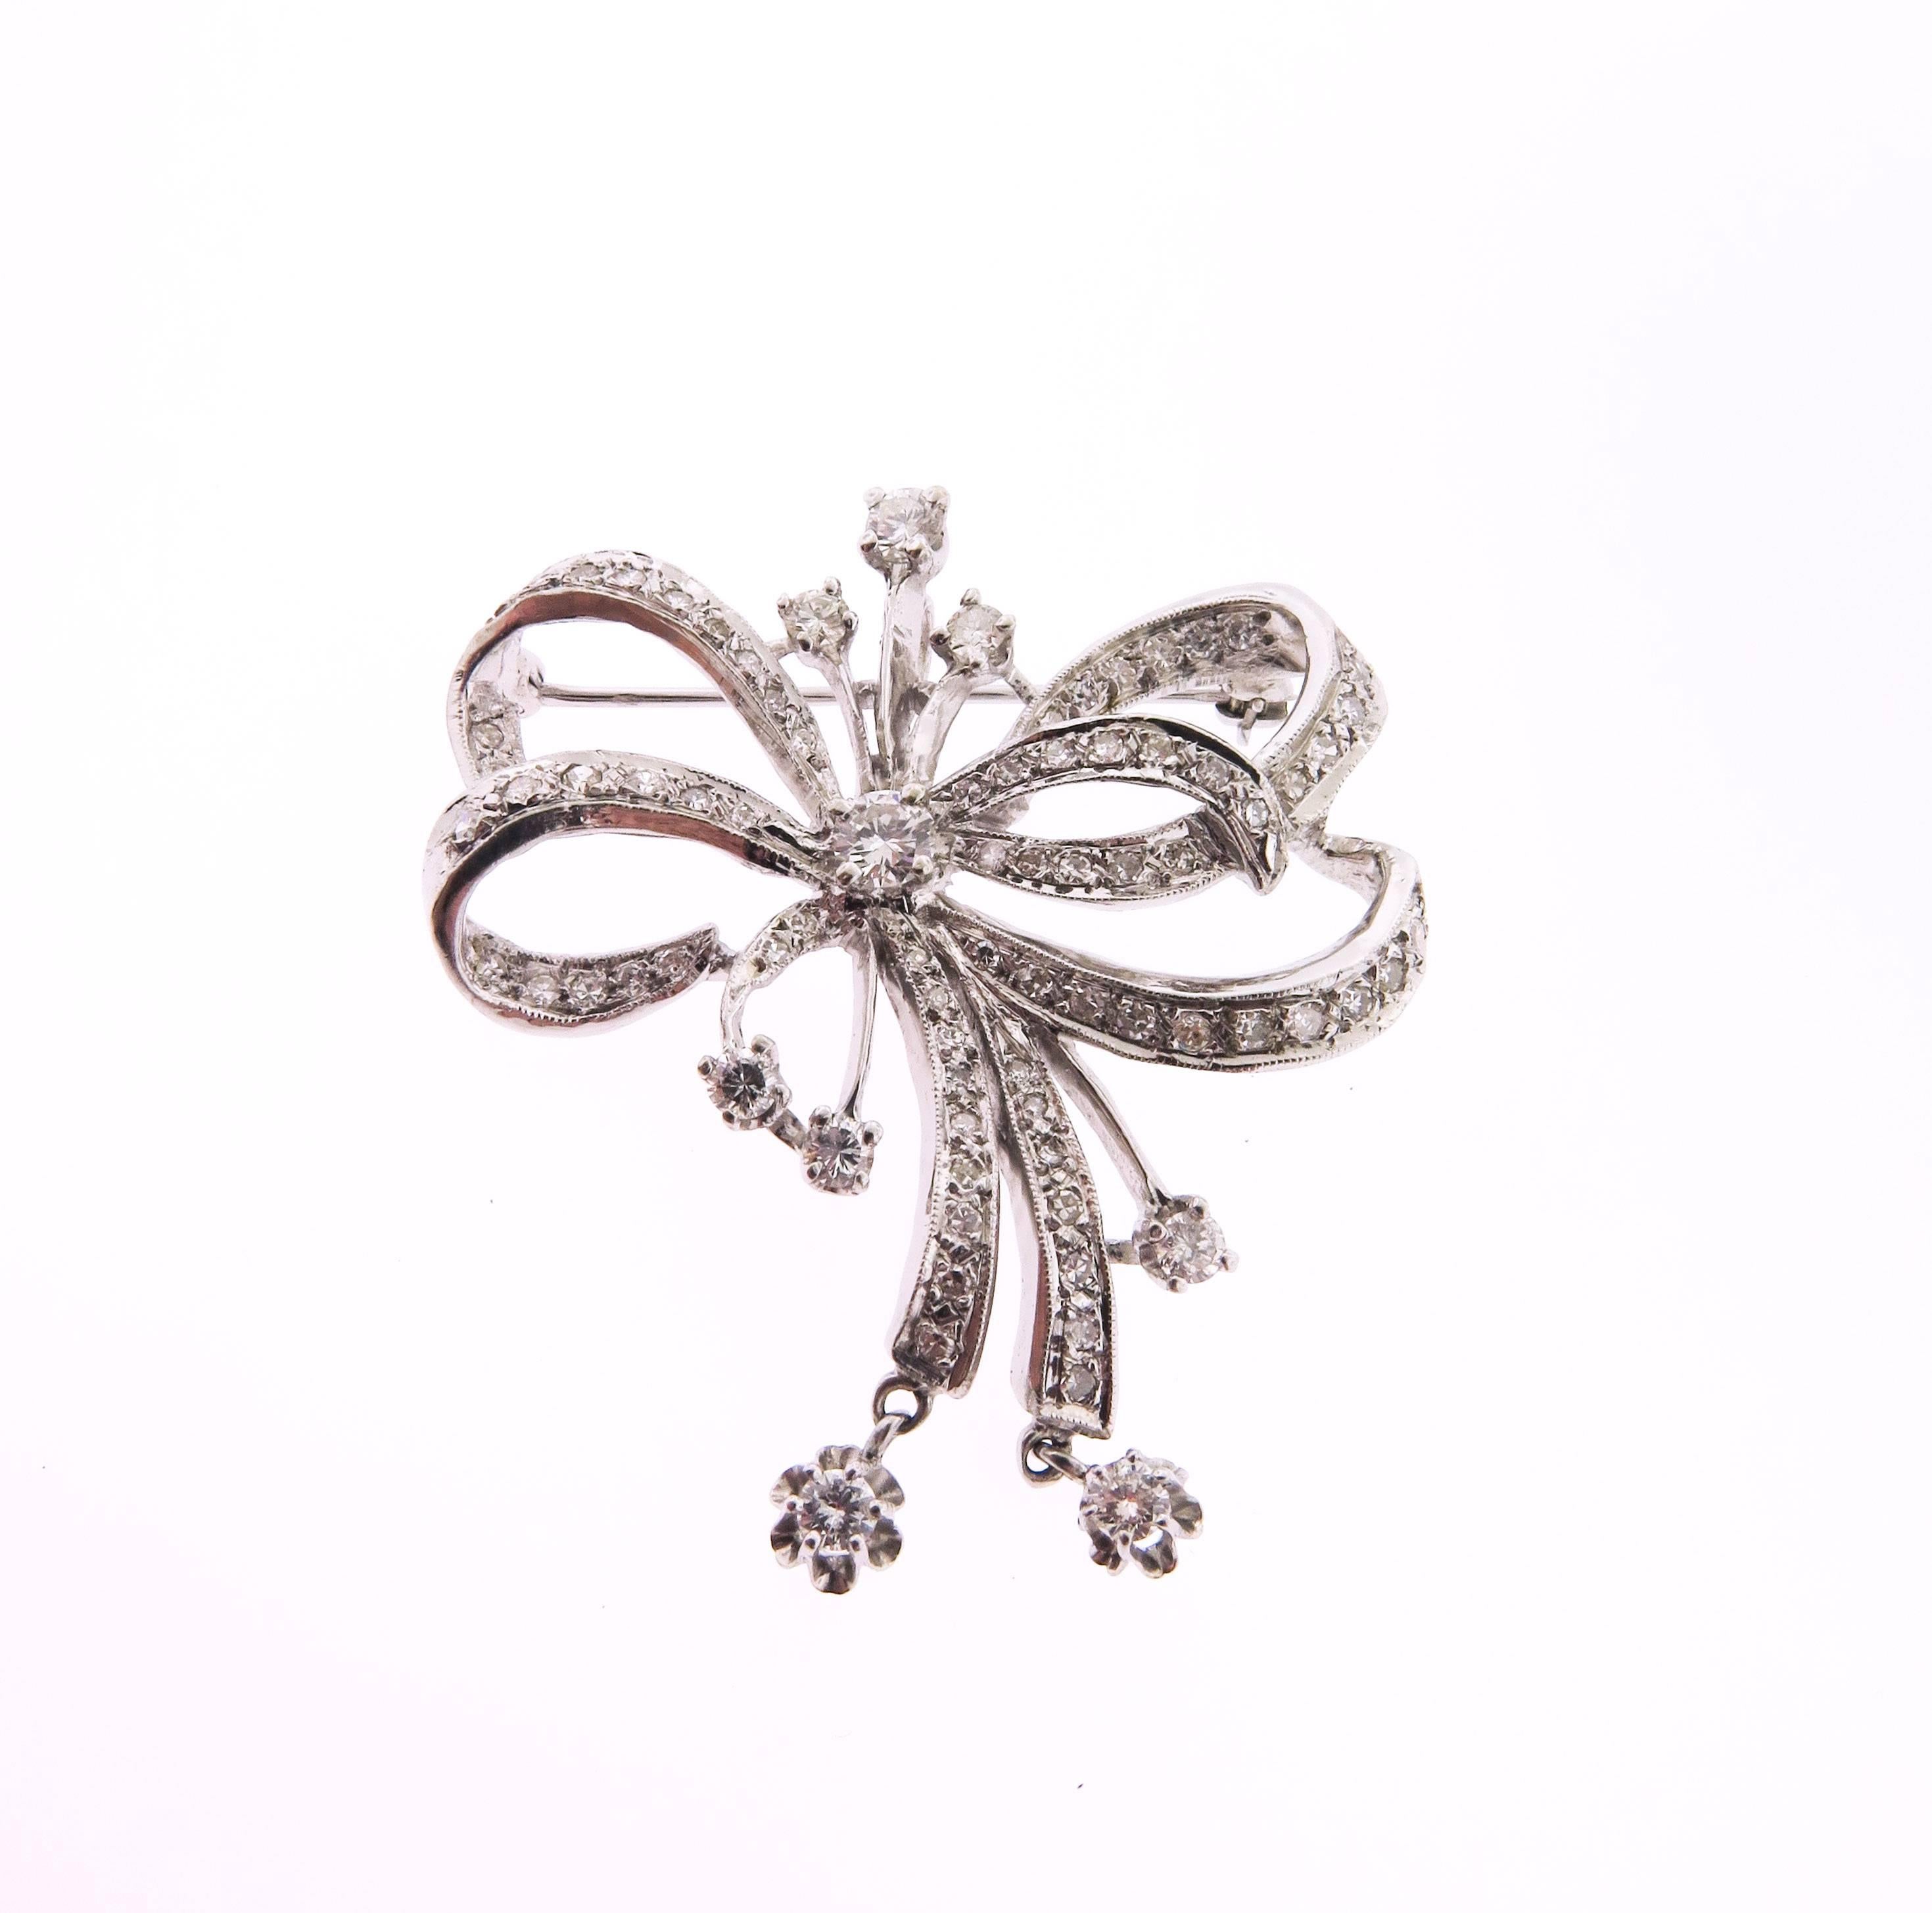 Antique brooch in the form of an openwork bow that is covered with round cut diamonds and boasts a claw set diamond drops. The brooch features a pin clasp as well as a hidden baile that enables you to wear it as a pendant. 
